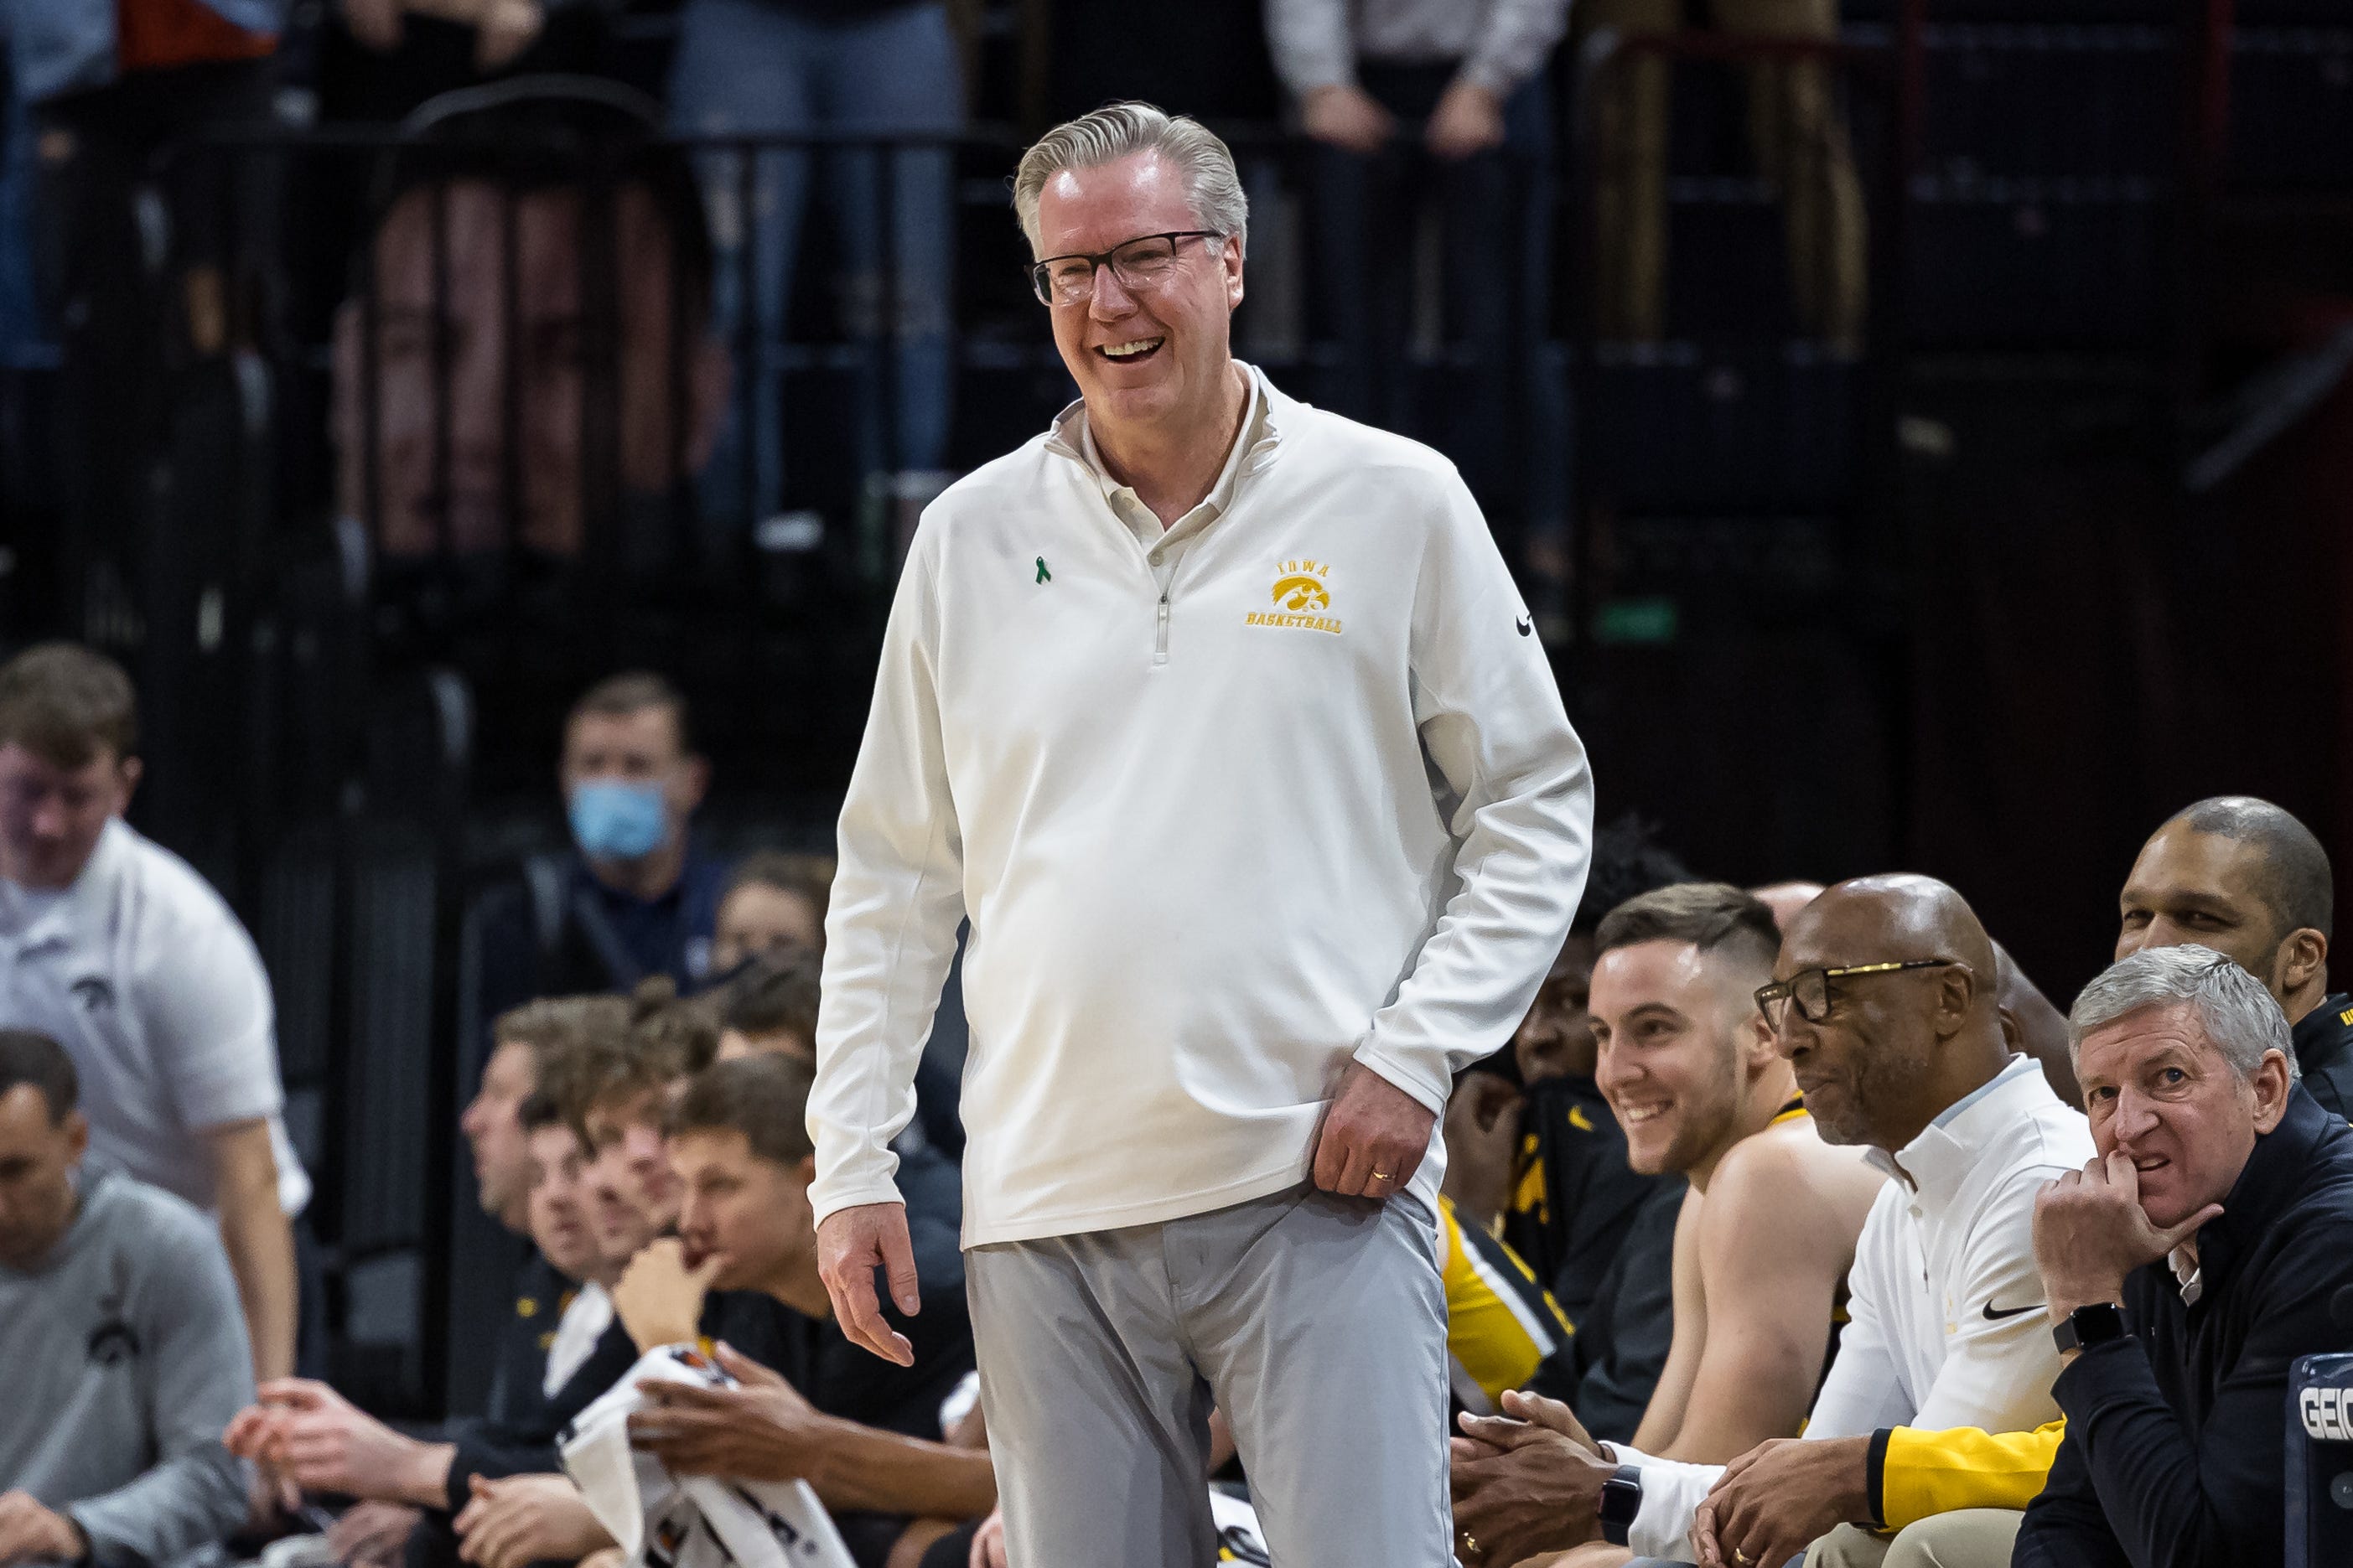 Iowa Hawkeyes head coach Fran McCaffery reacts to a play against the Virginia Cavaliers during the first half, Monday, Nov. 29, 2021, at John Paul Jones Arena in Charlottesville, Va.